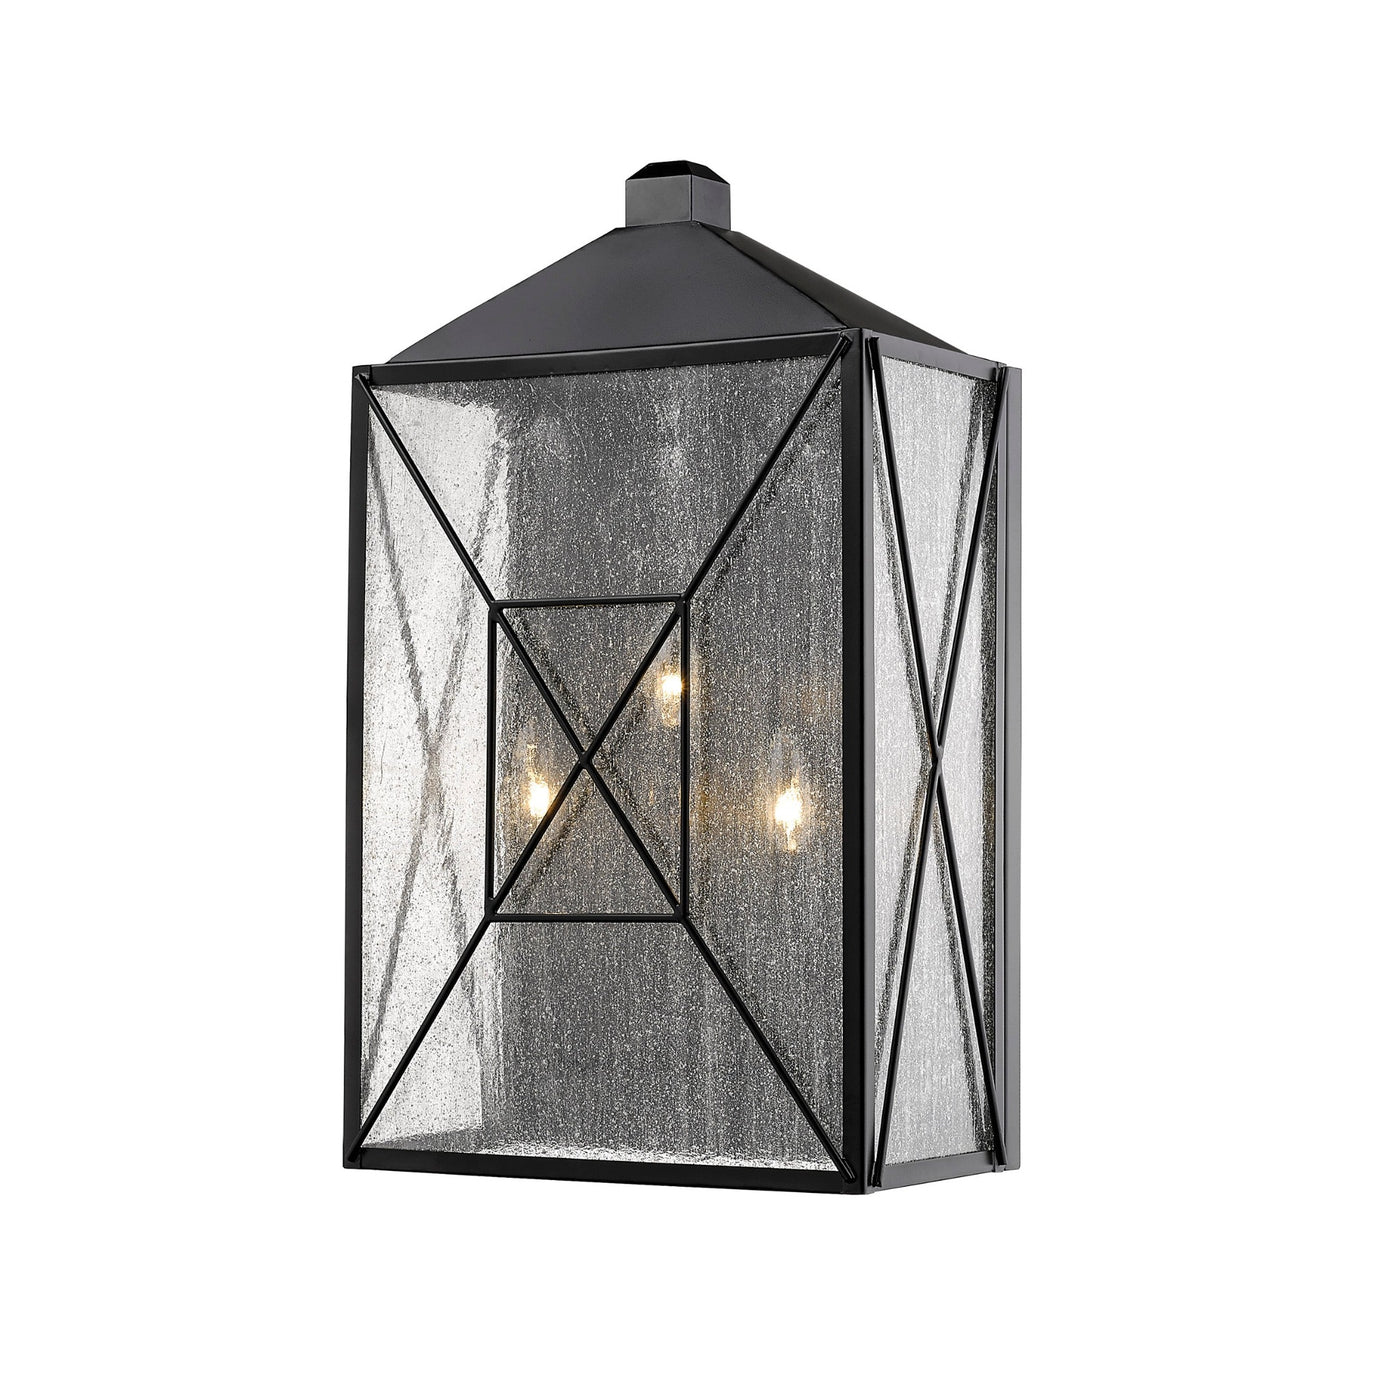 Millennium Lighting 3 Light 22" Outdoor Wall Sconce, Caswell Collection